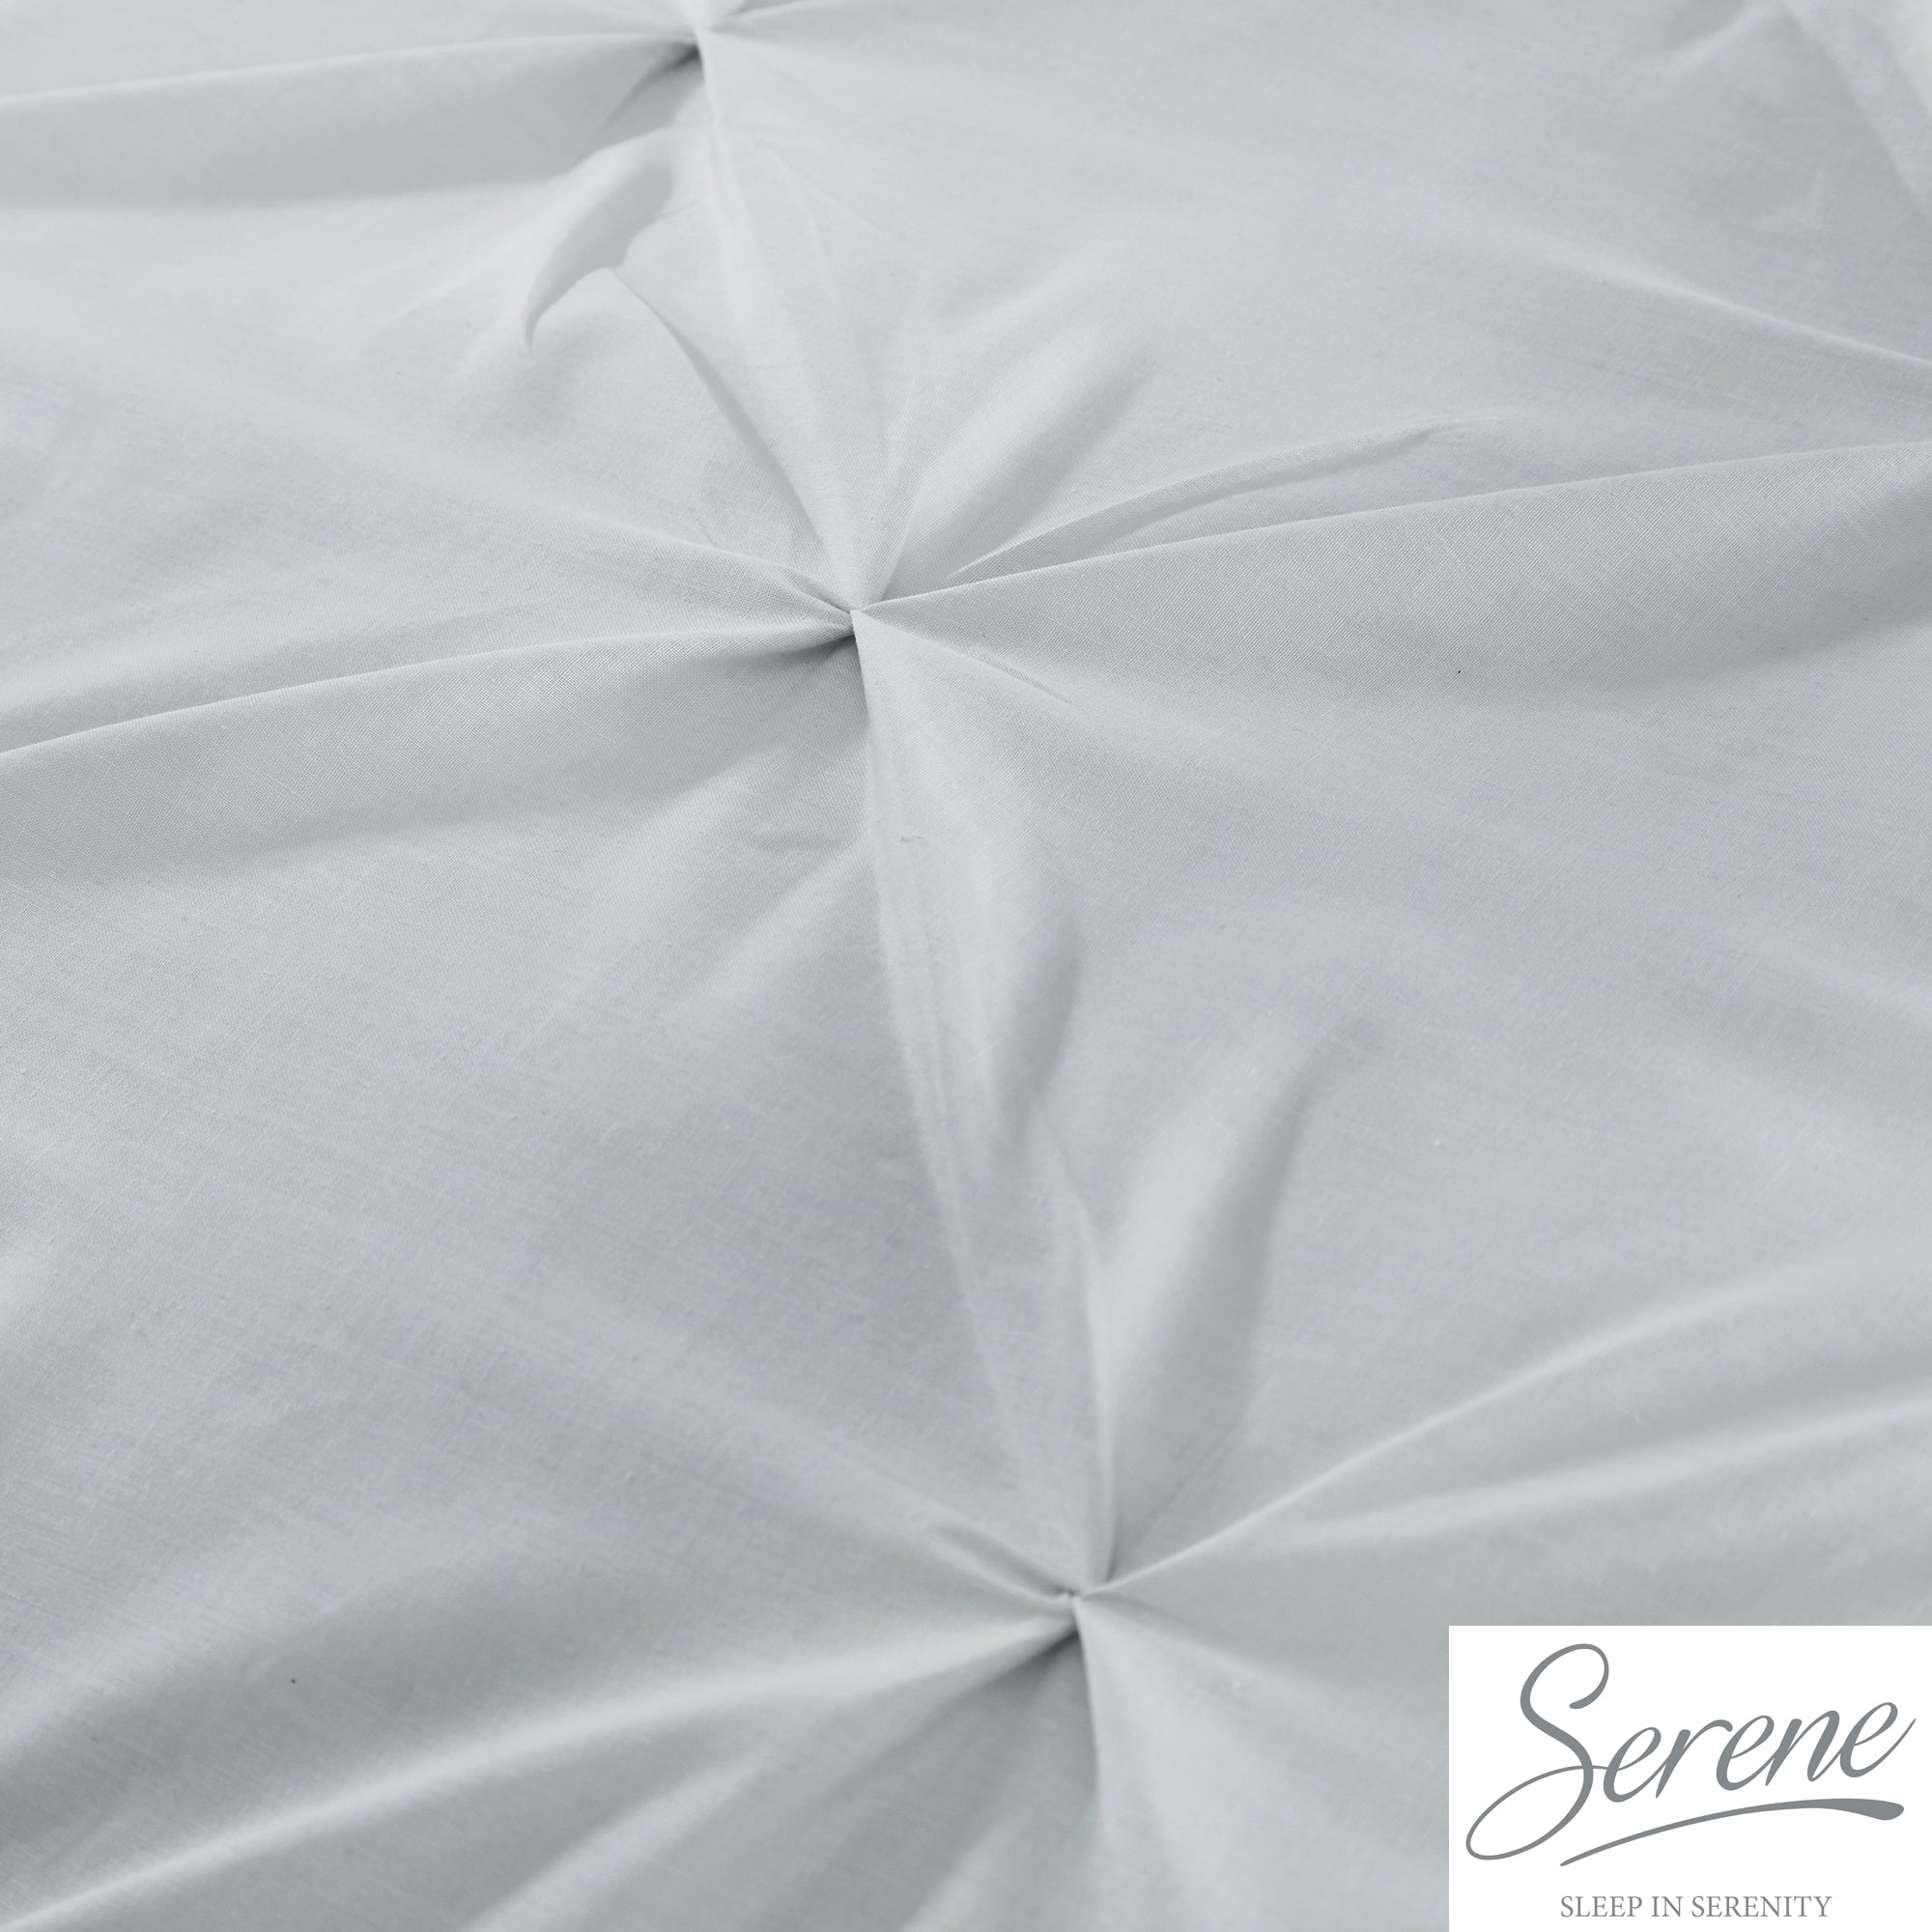 Lara - Pleated Duvet Cover Set in Silver - by Serene